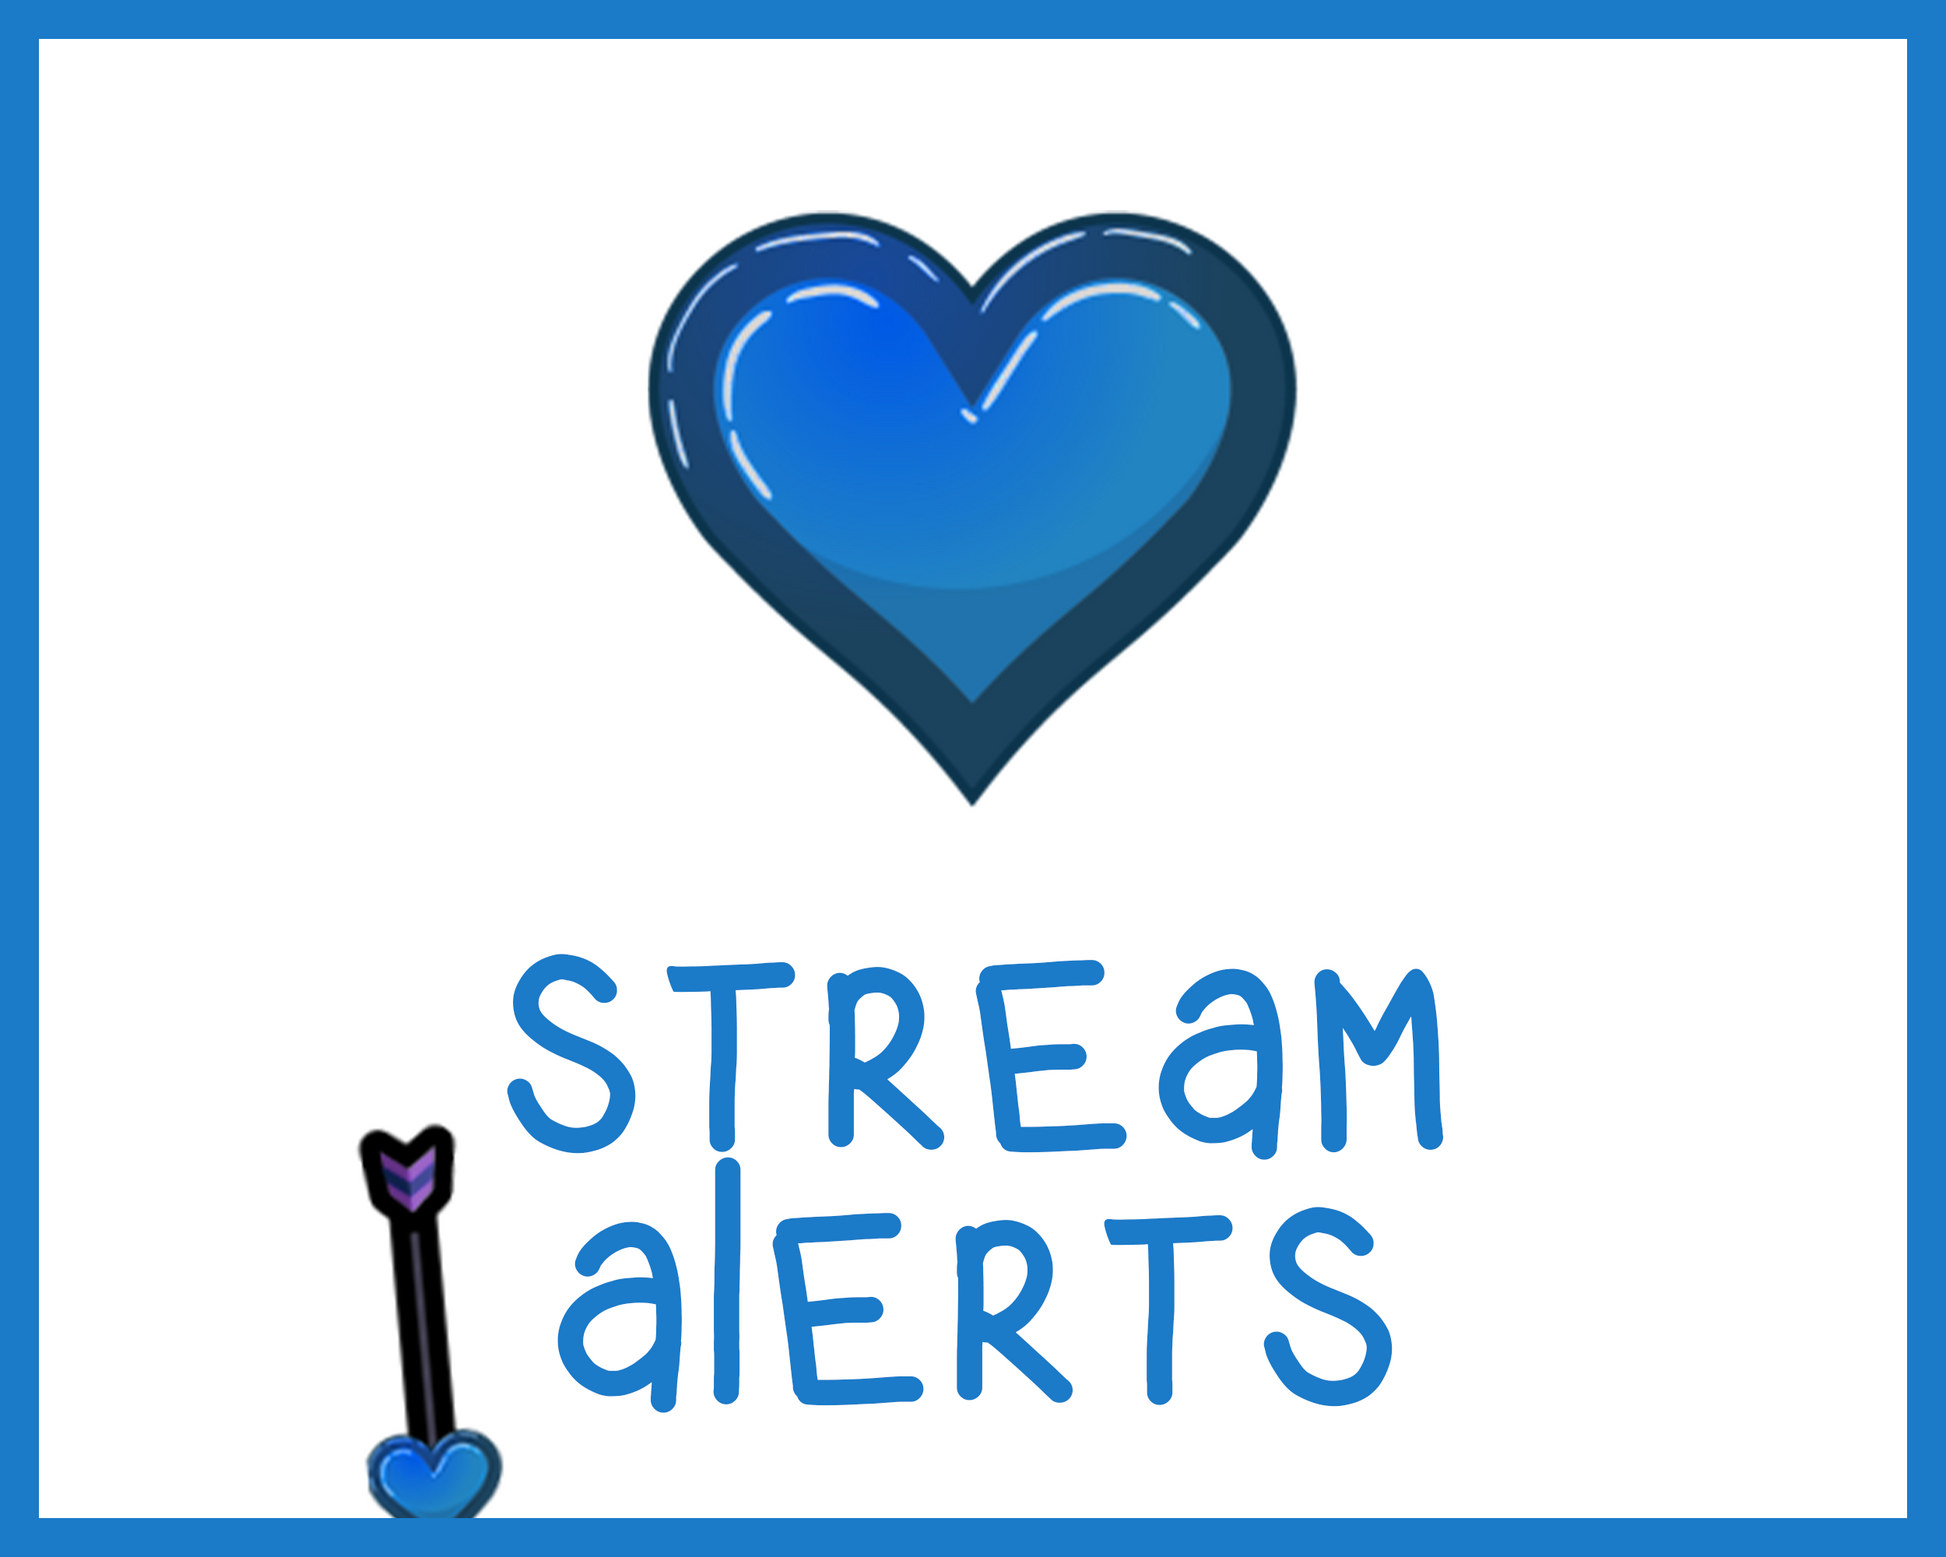 Love Arrow Animated Alerts for Twitch Streams, Cute Kawaii Heart Overlay, Follow Subscribe Cheer Raid Donation Gift, Valentines Day, Eros